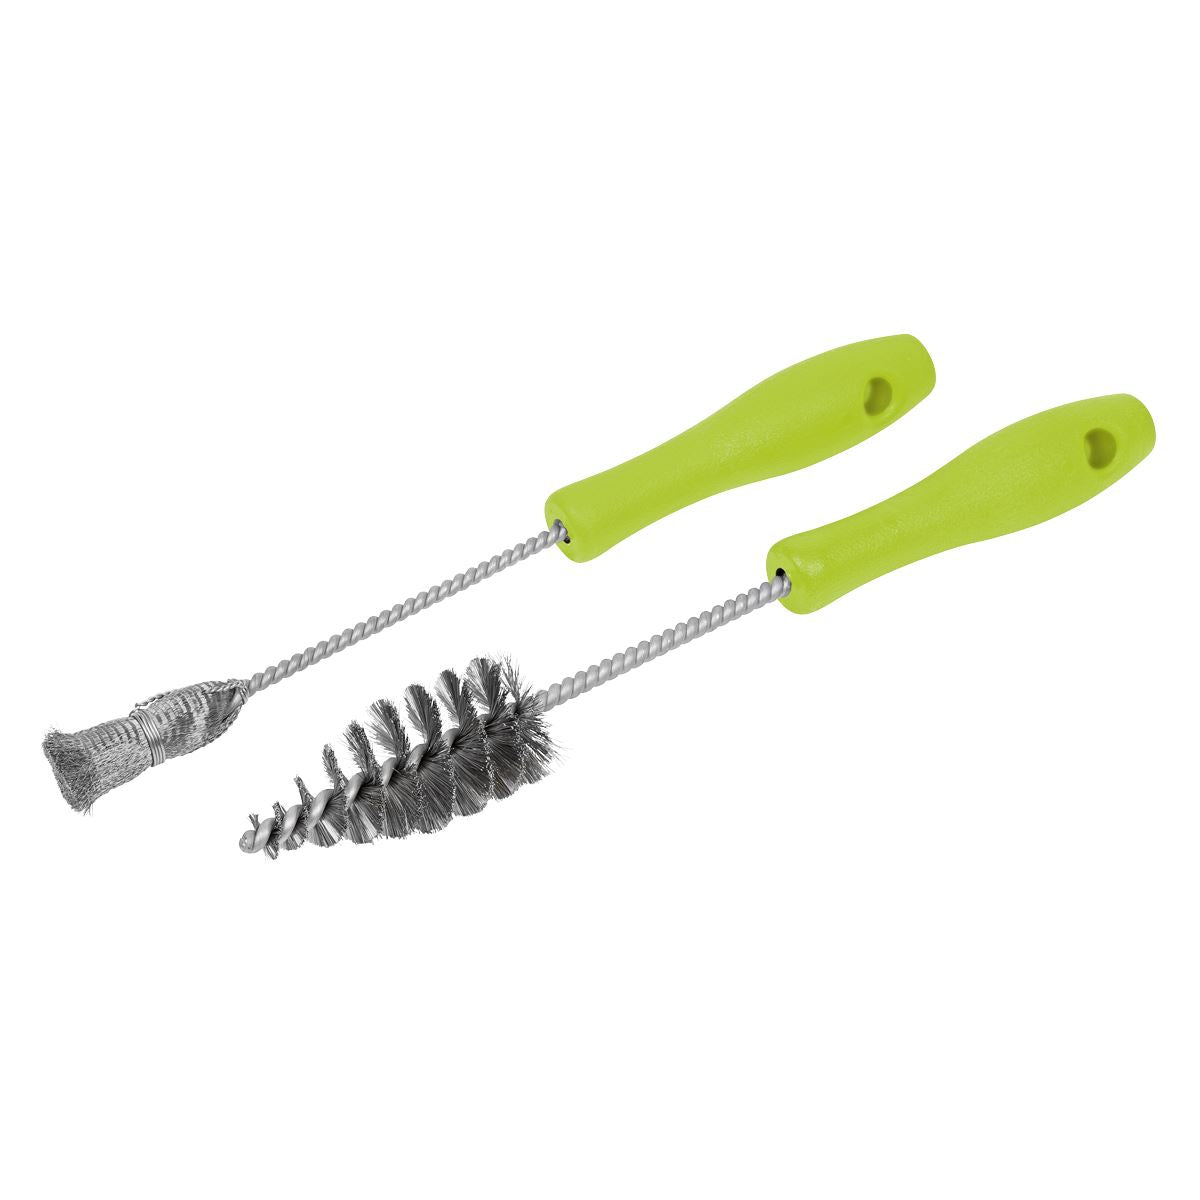 Sealey Injector Bore Cleaning Brush Set 2pc